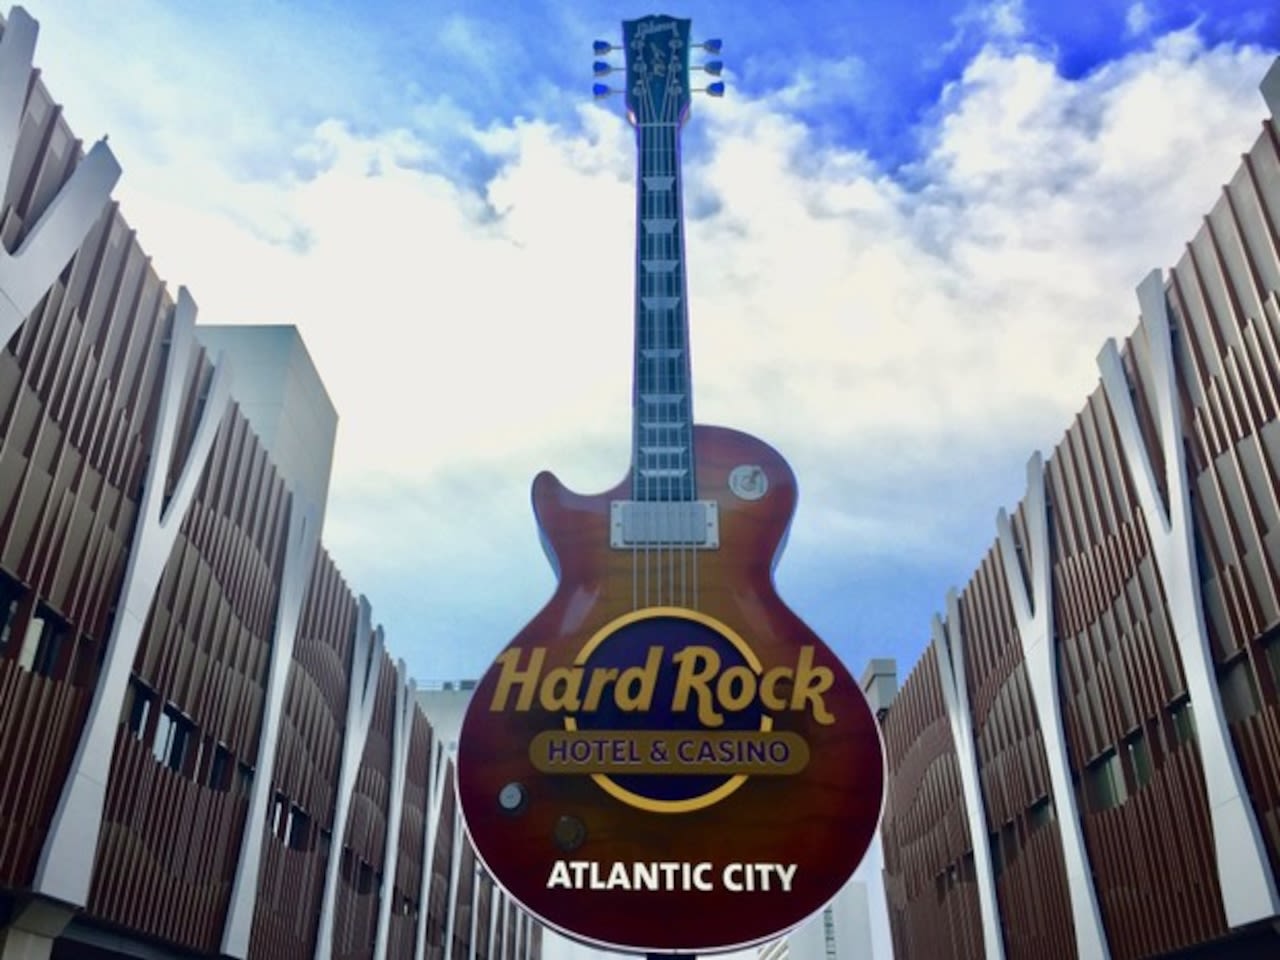 Slot player wins $1.5M with $10 bet at Hard Rock Atlantic City